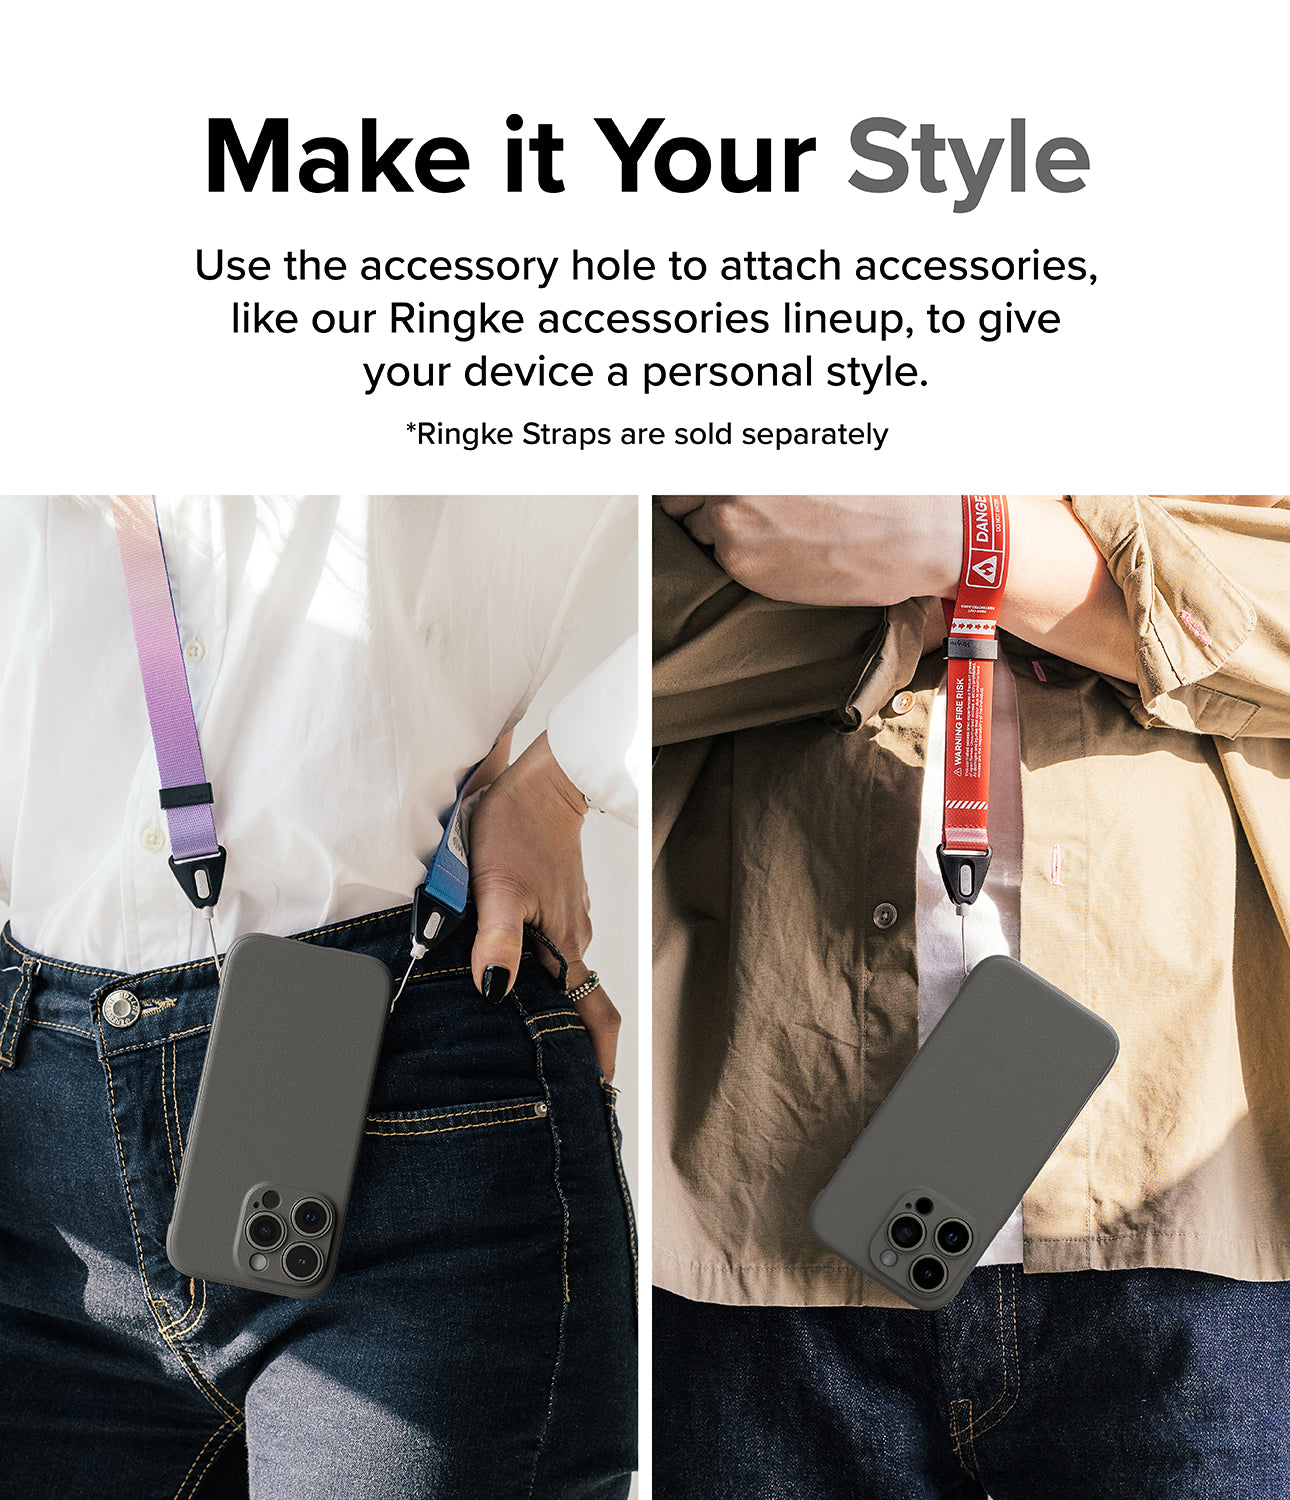 iPhone 15 Pro Case | Onyx - Gray - Make it Your Style. Use the accessory hole to attach accessories, like our Ringke accessories lineup, to give your device a personal style.